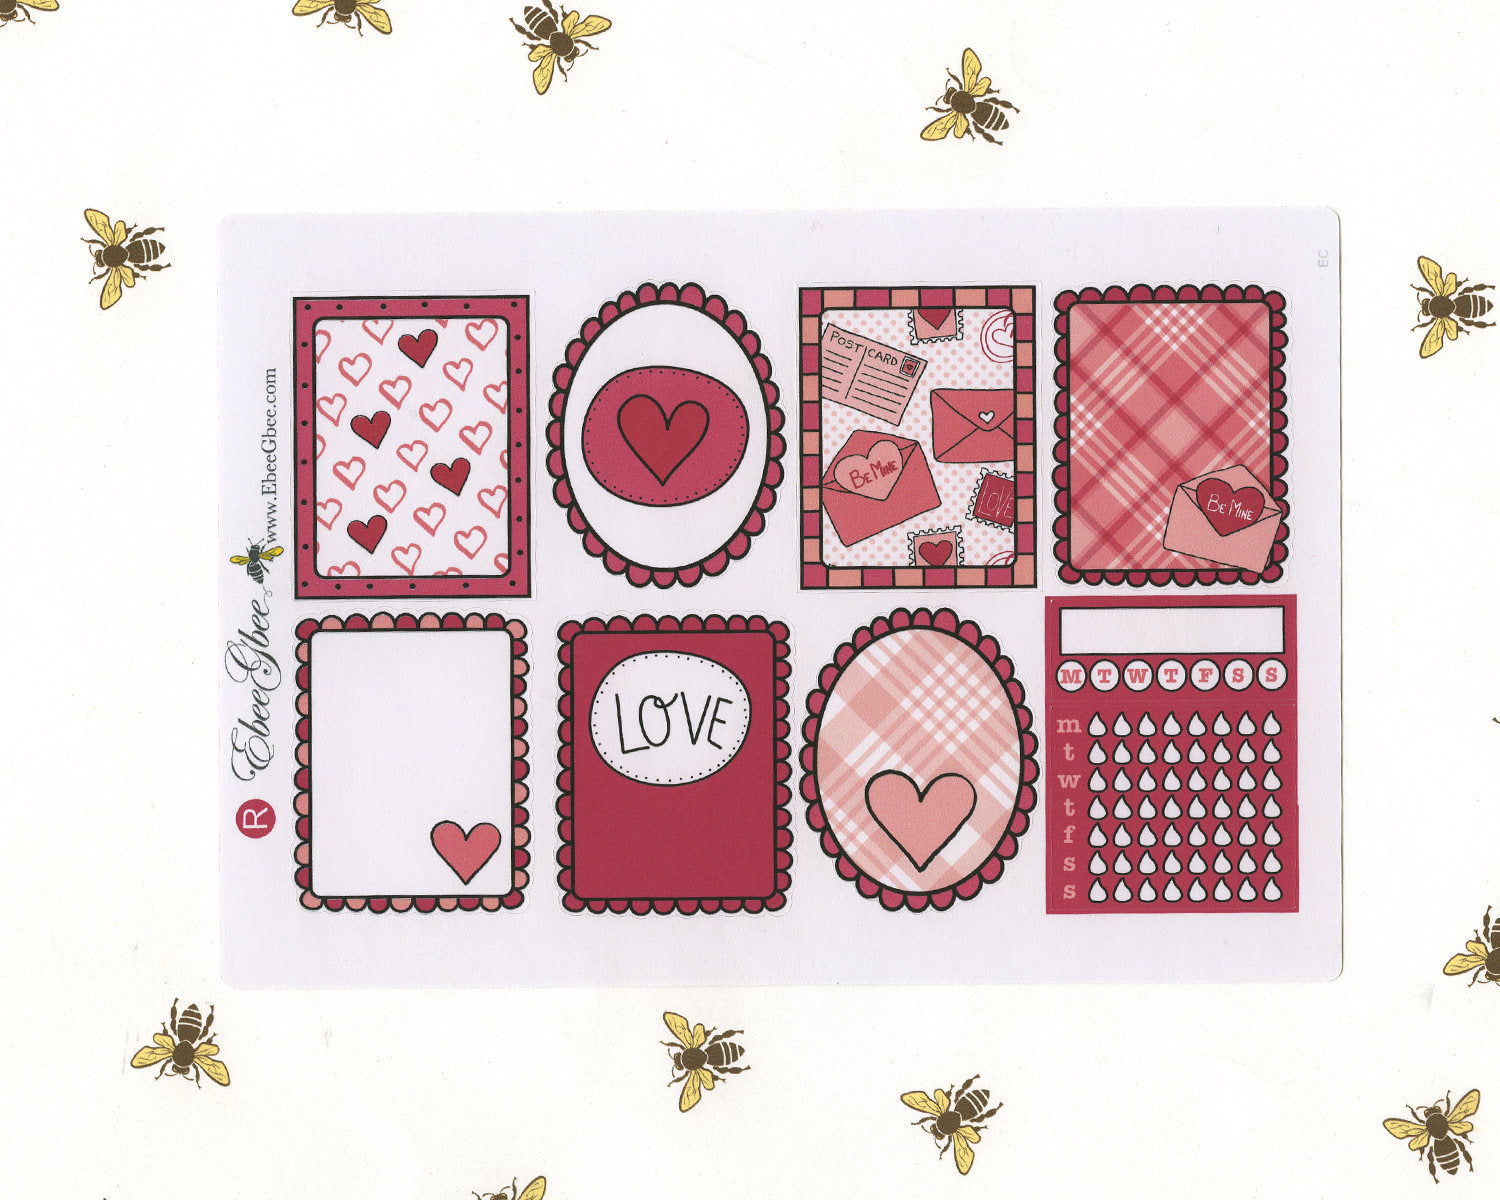 LOVE LETTERS DELUXE Weekly Planner Sticker Set | Rose